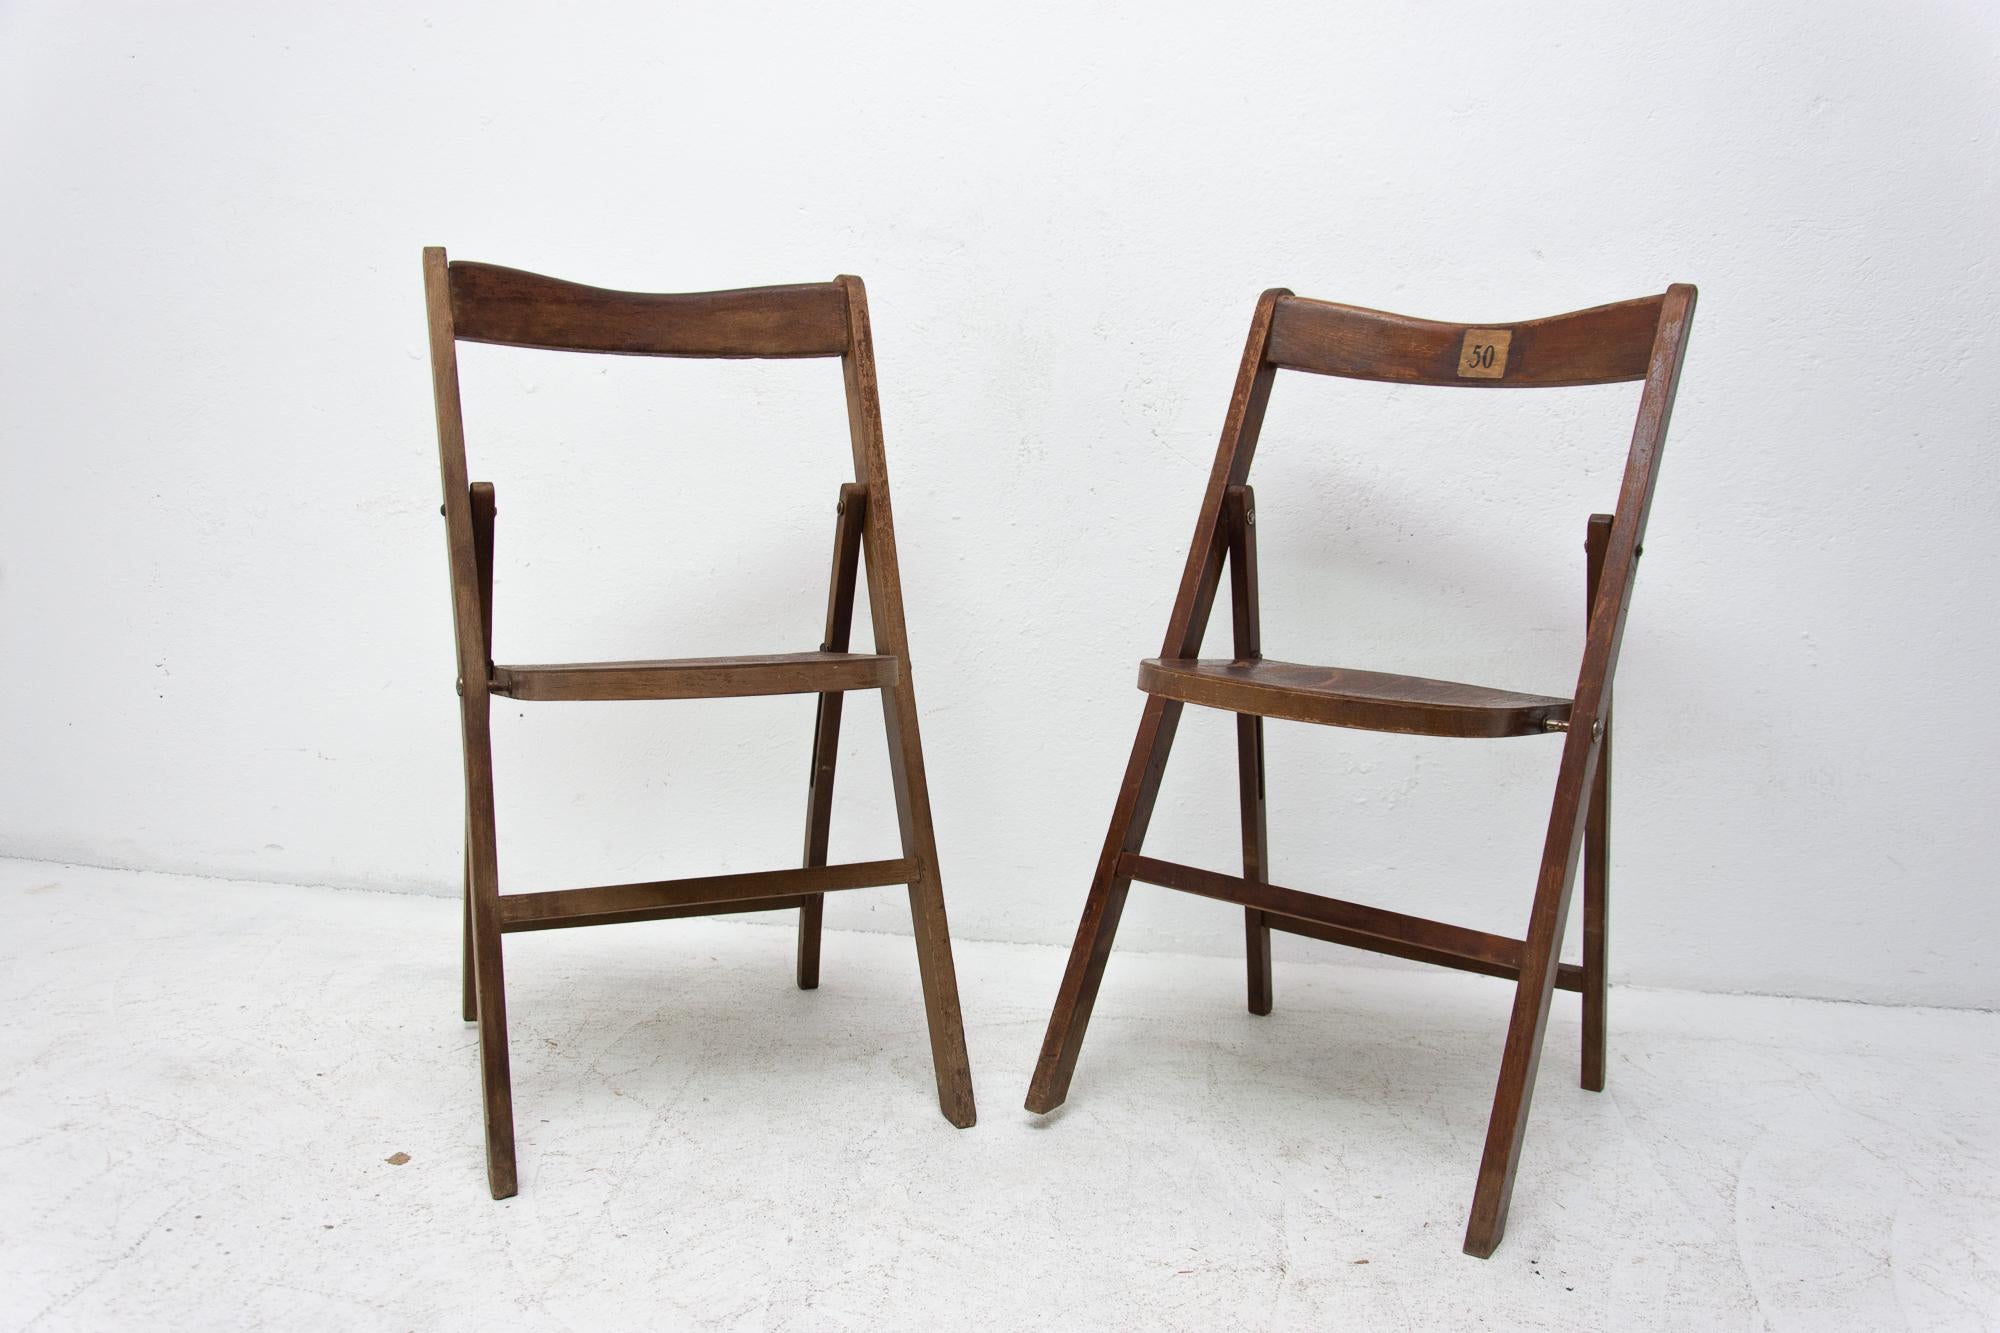 Pair of folding cinema or theater seats. Made in the former Czechoslovakia in the 1960s. It´s made of beechwood.

In good vintage condition. Price is for the piece.

Measures: Seat height 47 cm.